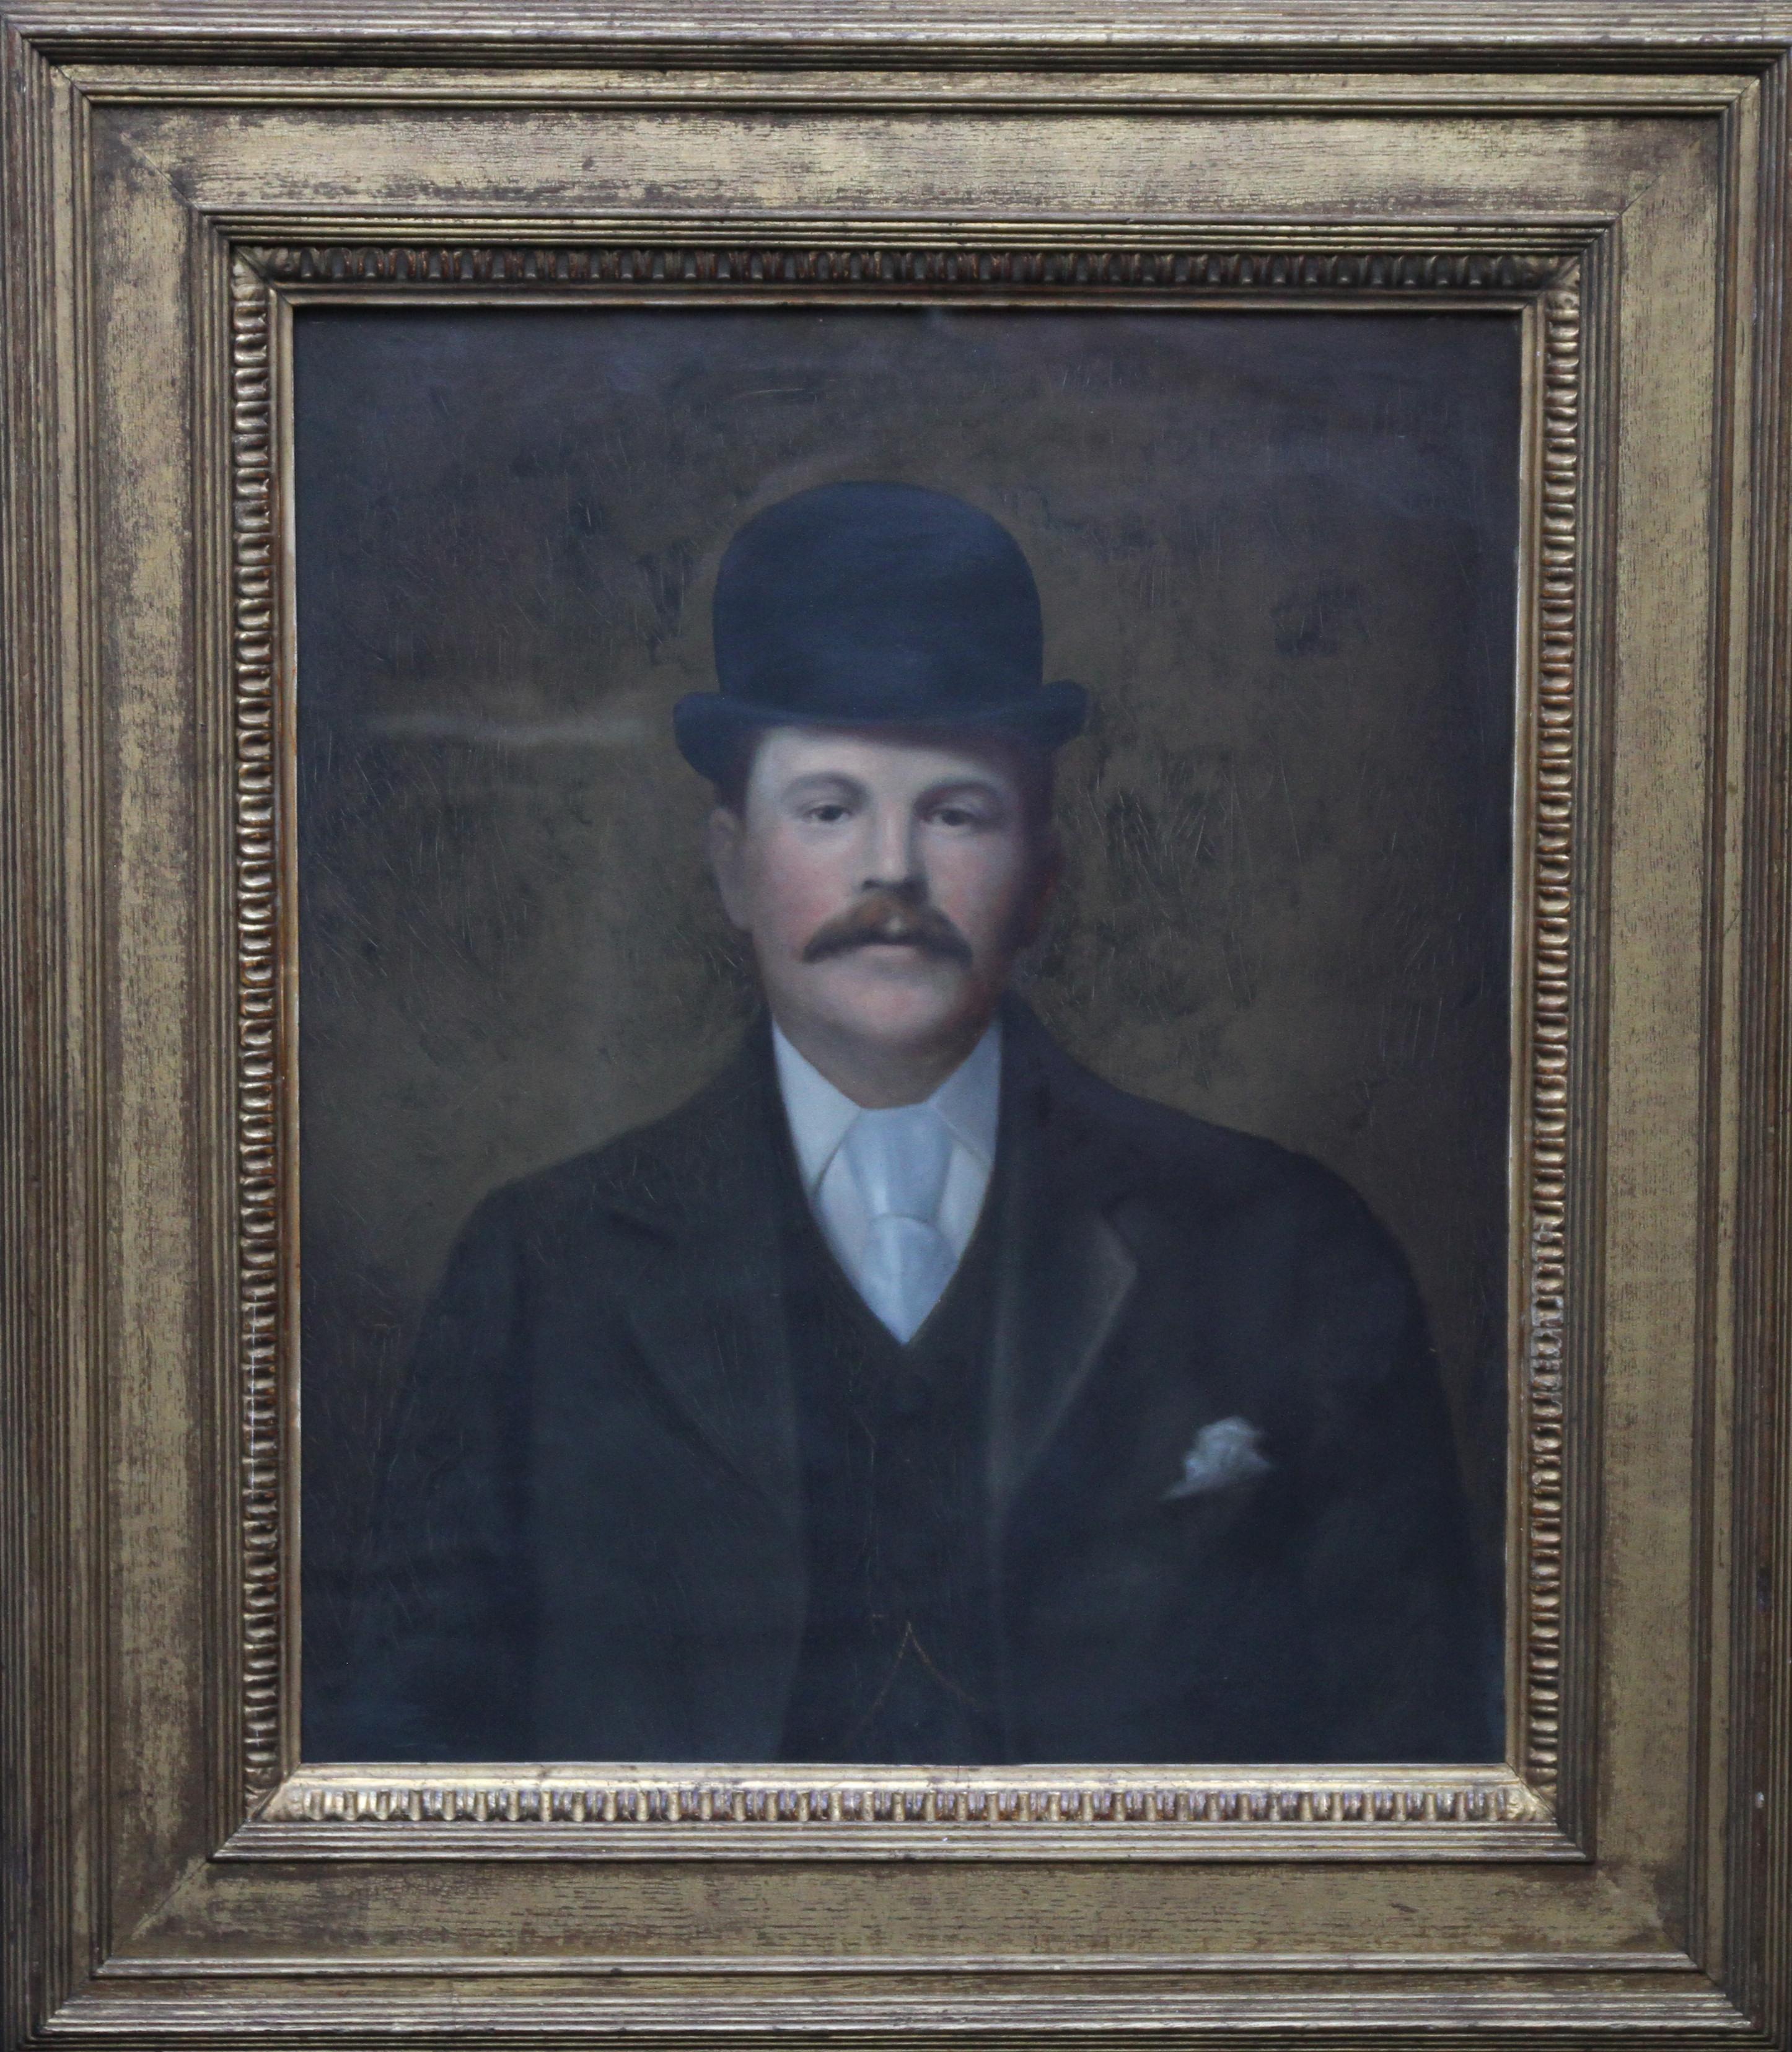 Unknown Portrait Painting - Portrait of a Gentleman in a Bowler Hat - British late 19th century art